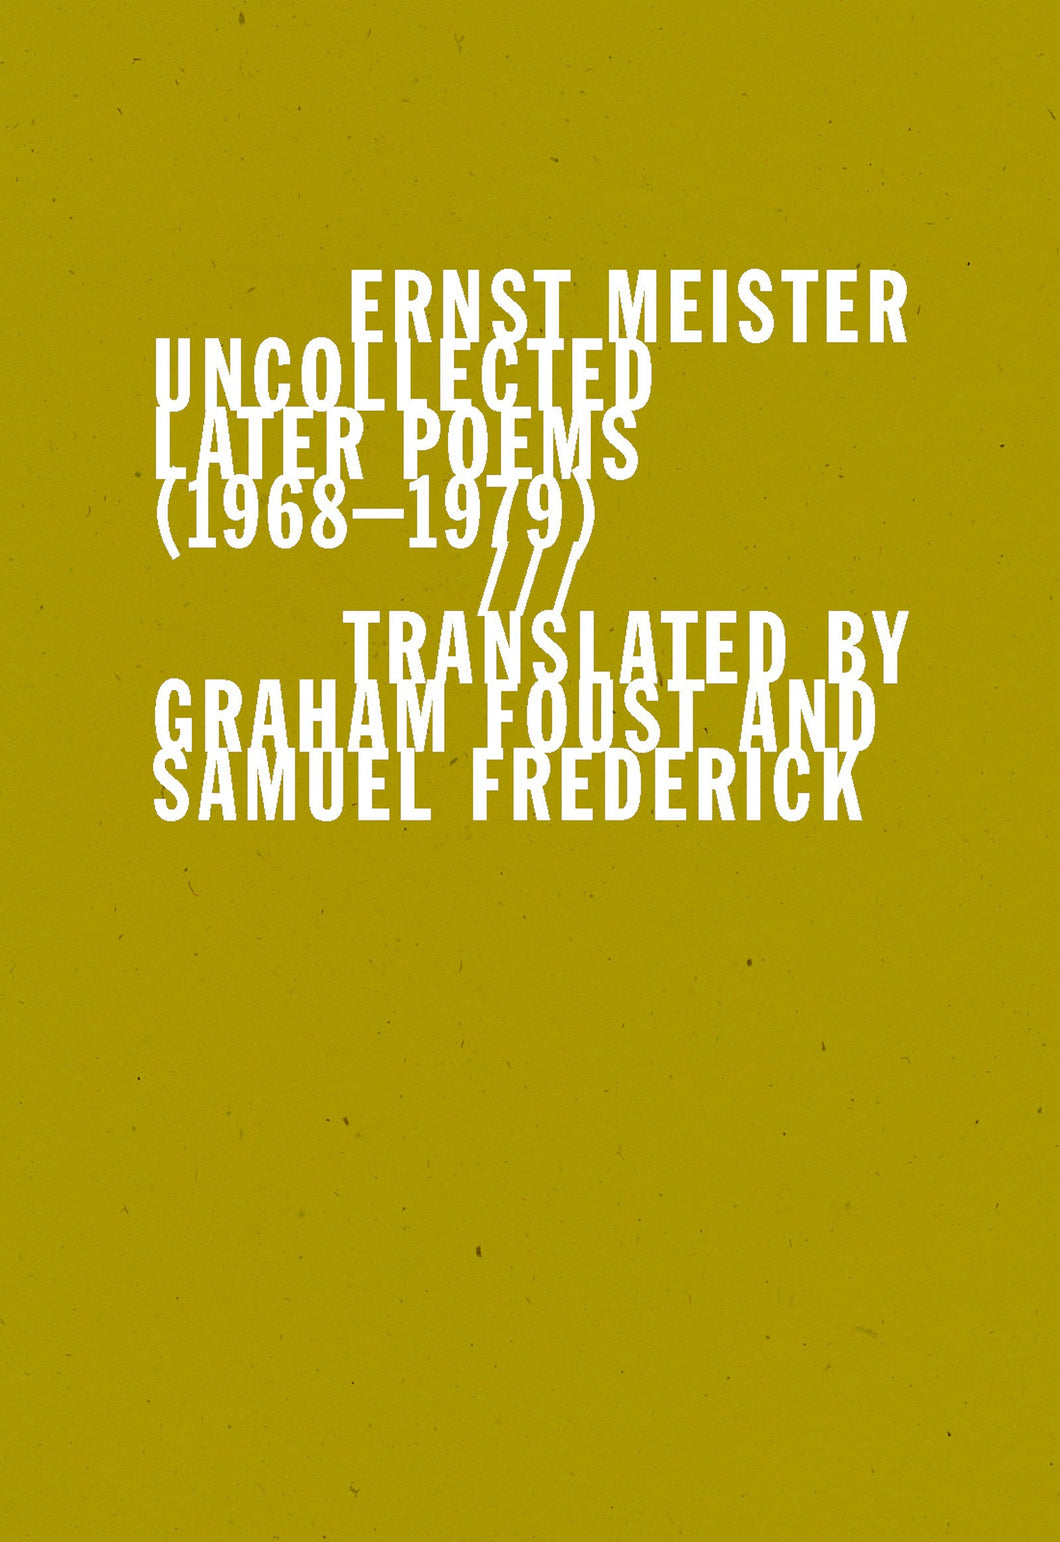 Meister, Ernst: Uncollected Later Poems (1968-1979)